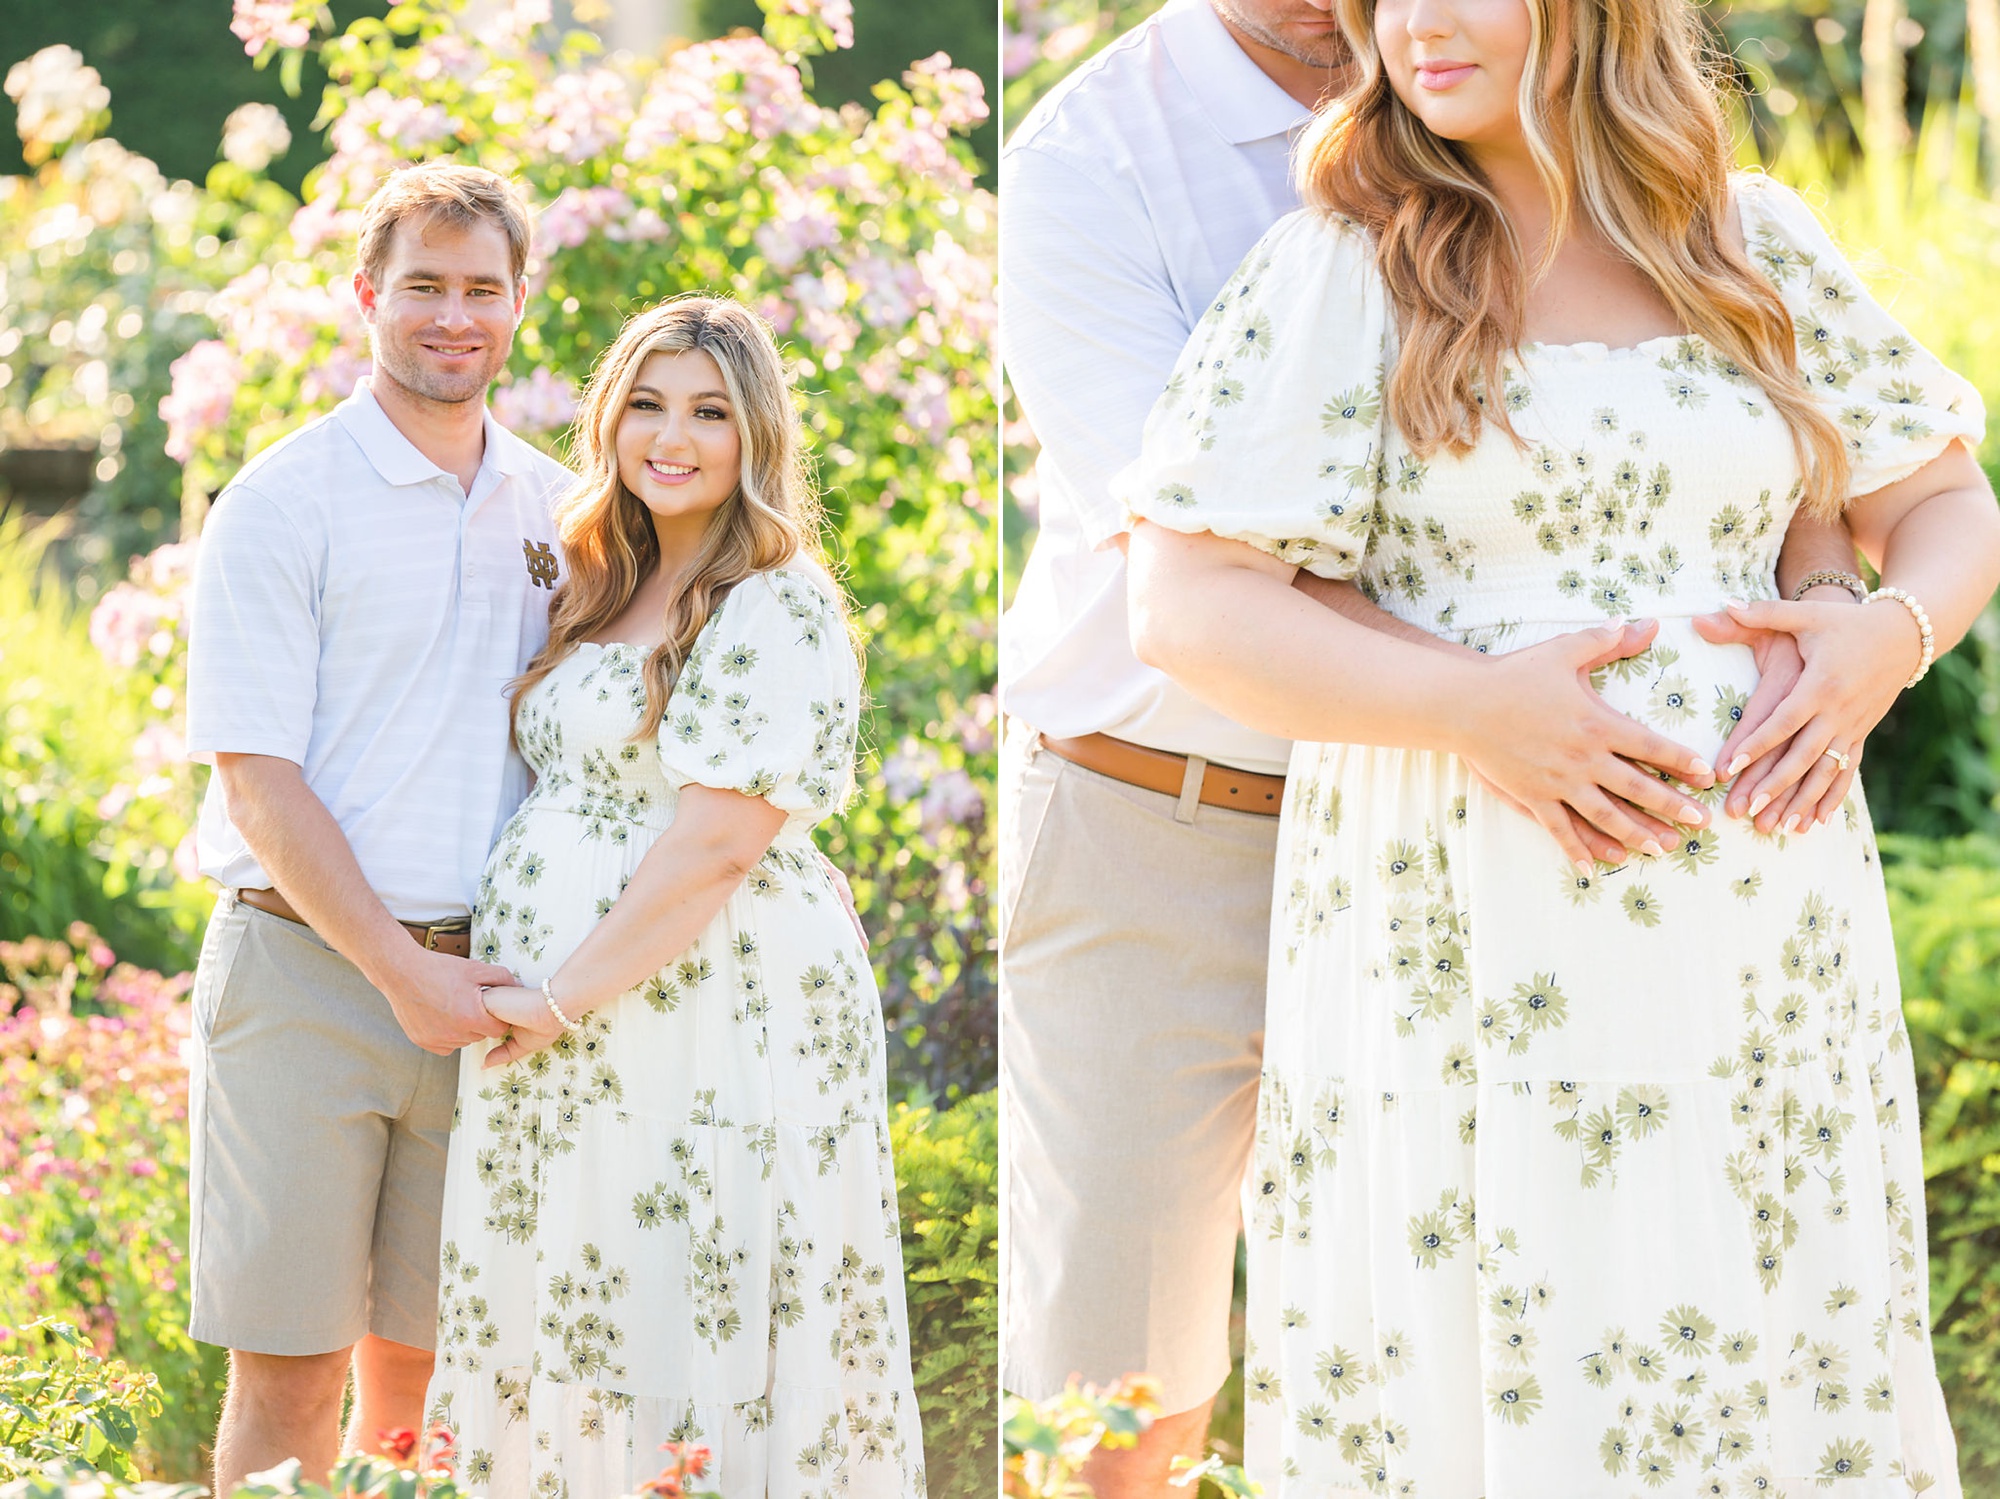 married couple hugs in garden holding woman's baby bump 